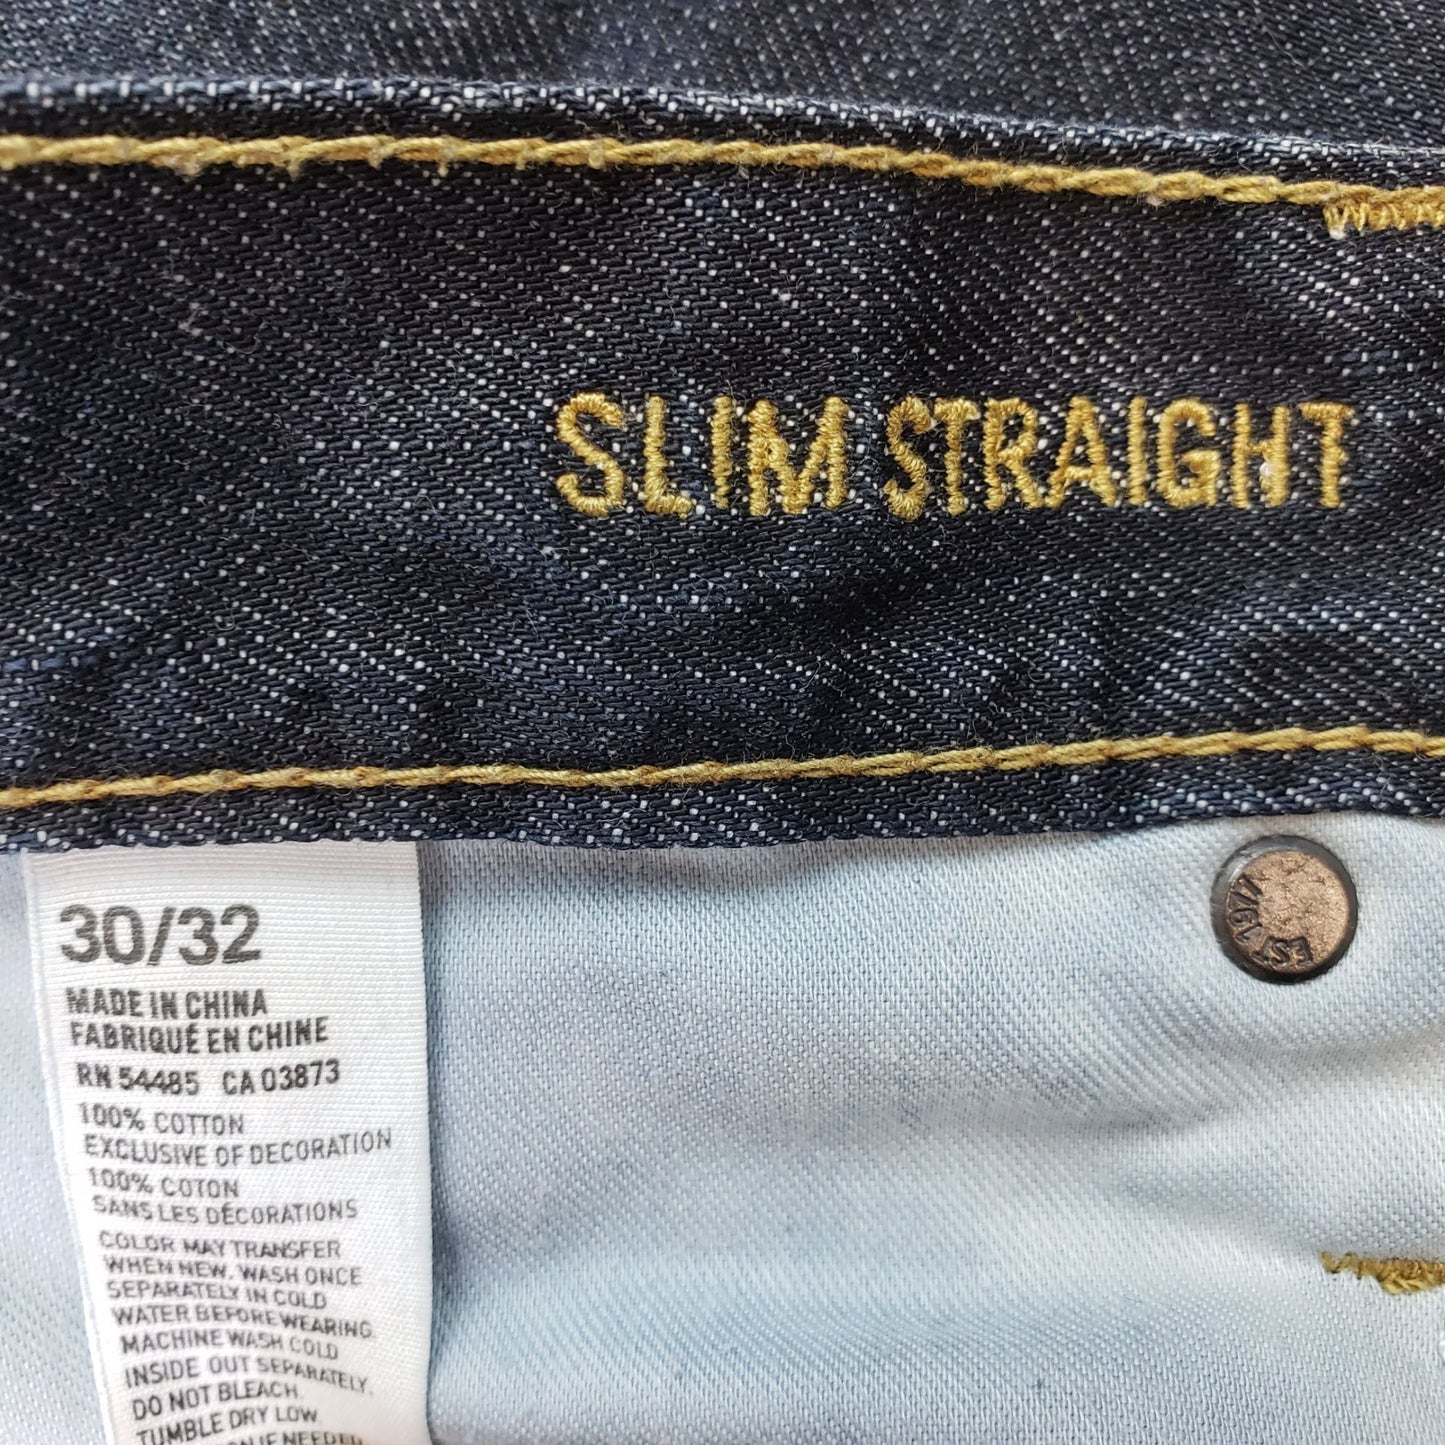 American Eagle Slim Straight Jeans Size 30x32